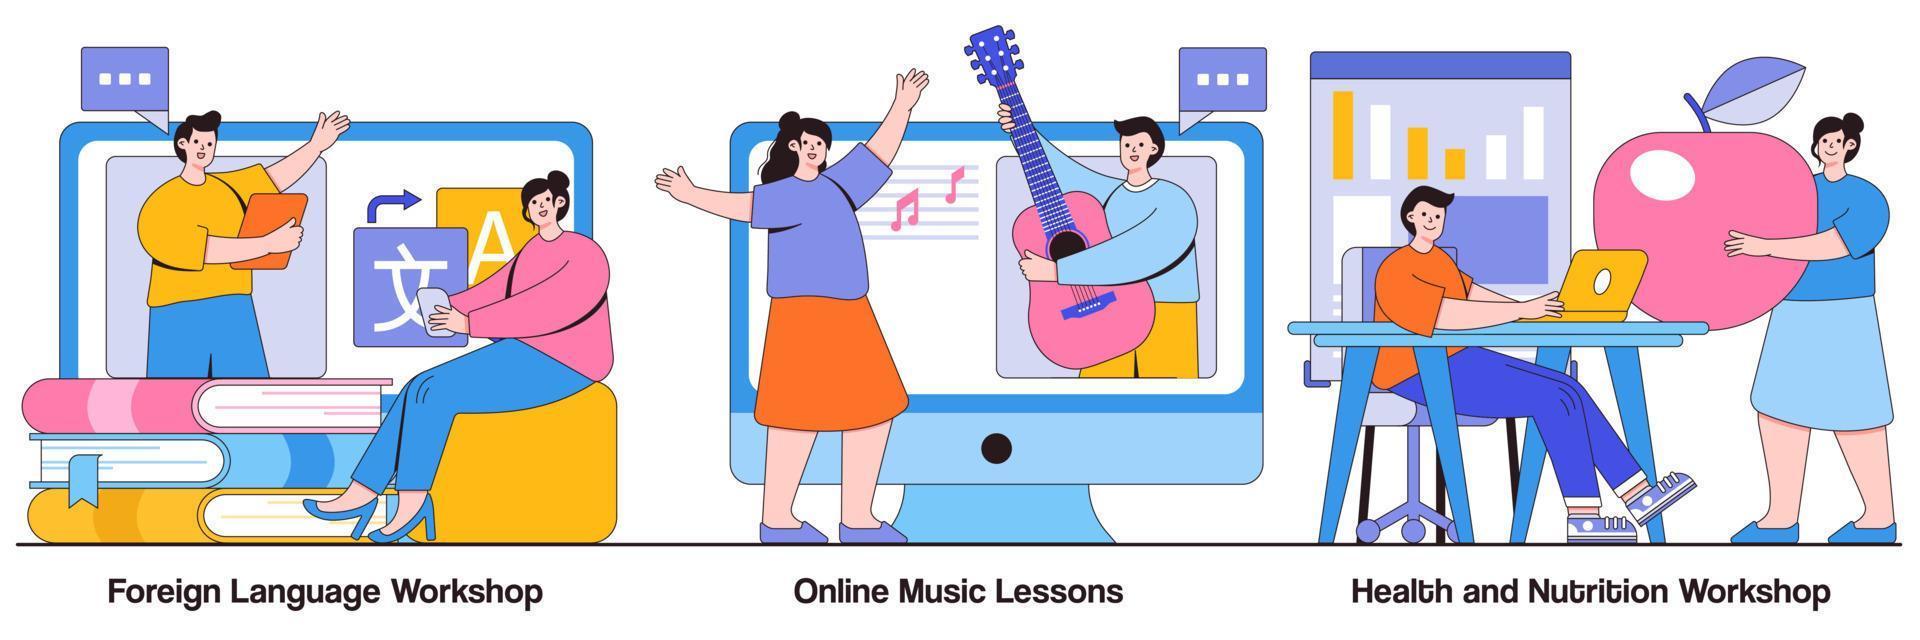 Foreign language workshop, online music lesson, health and nutrition workshop concept with tiny people. Supplementary education vector illustration set. Native speaker course, learn cooking metaphor